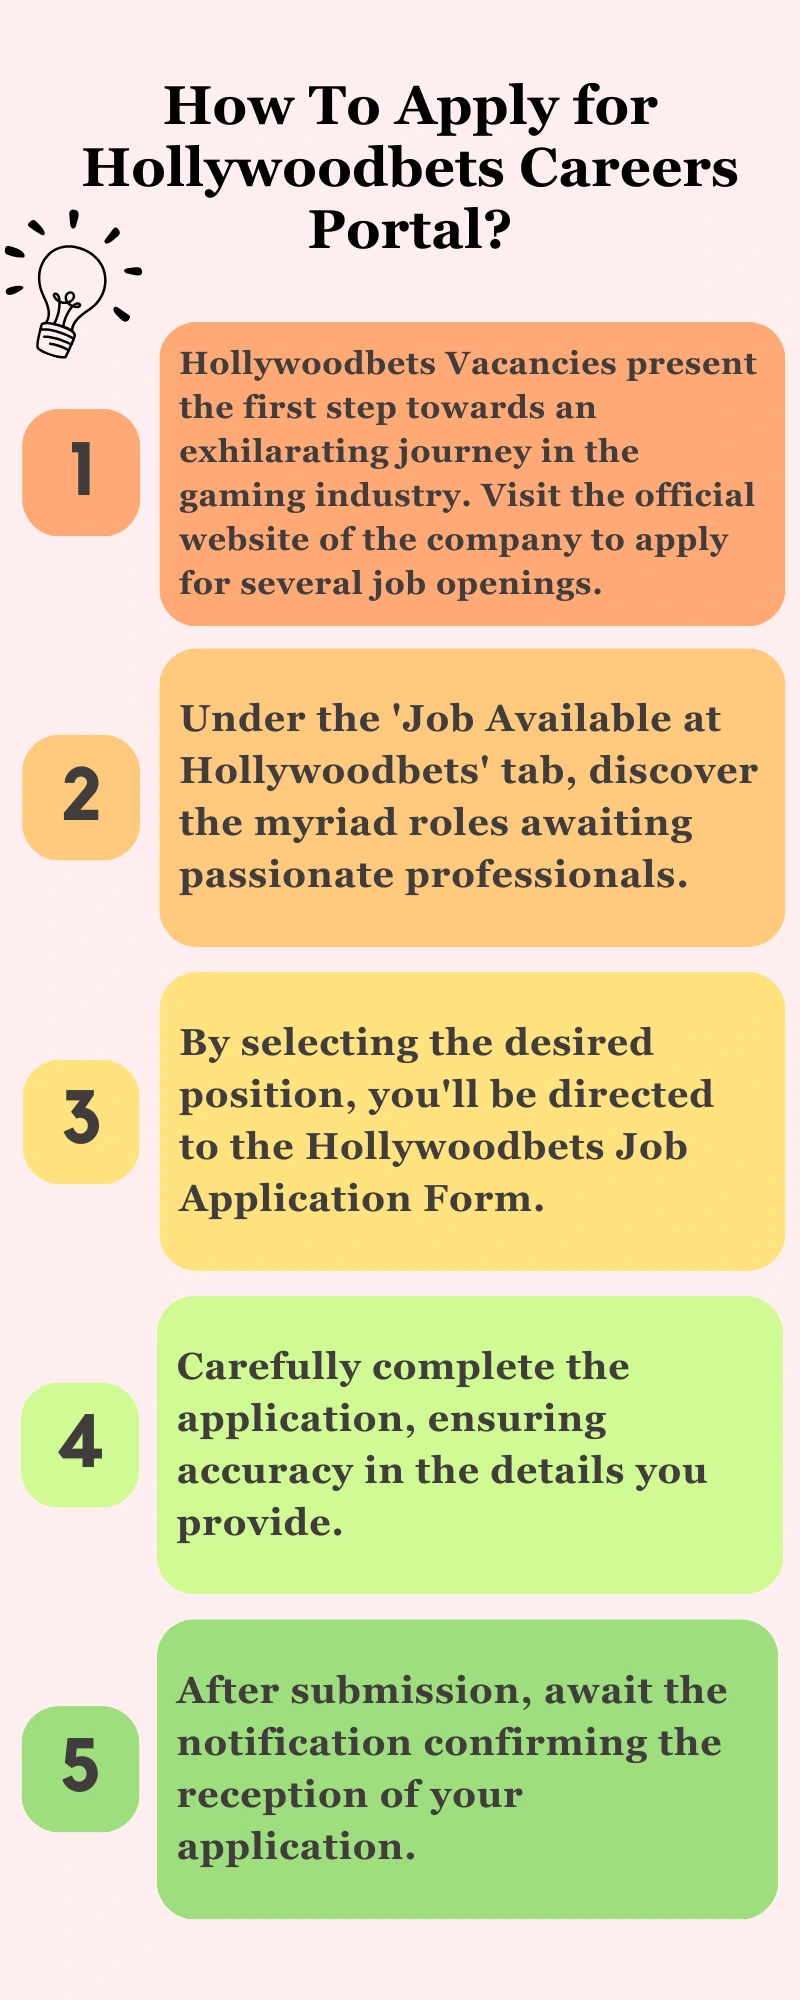 How To Apply for Hollywoodbets Careers Portal?